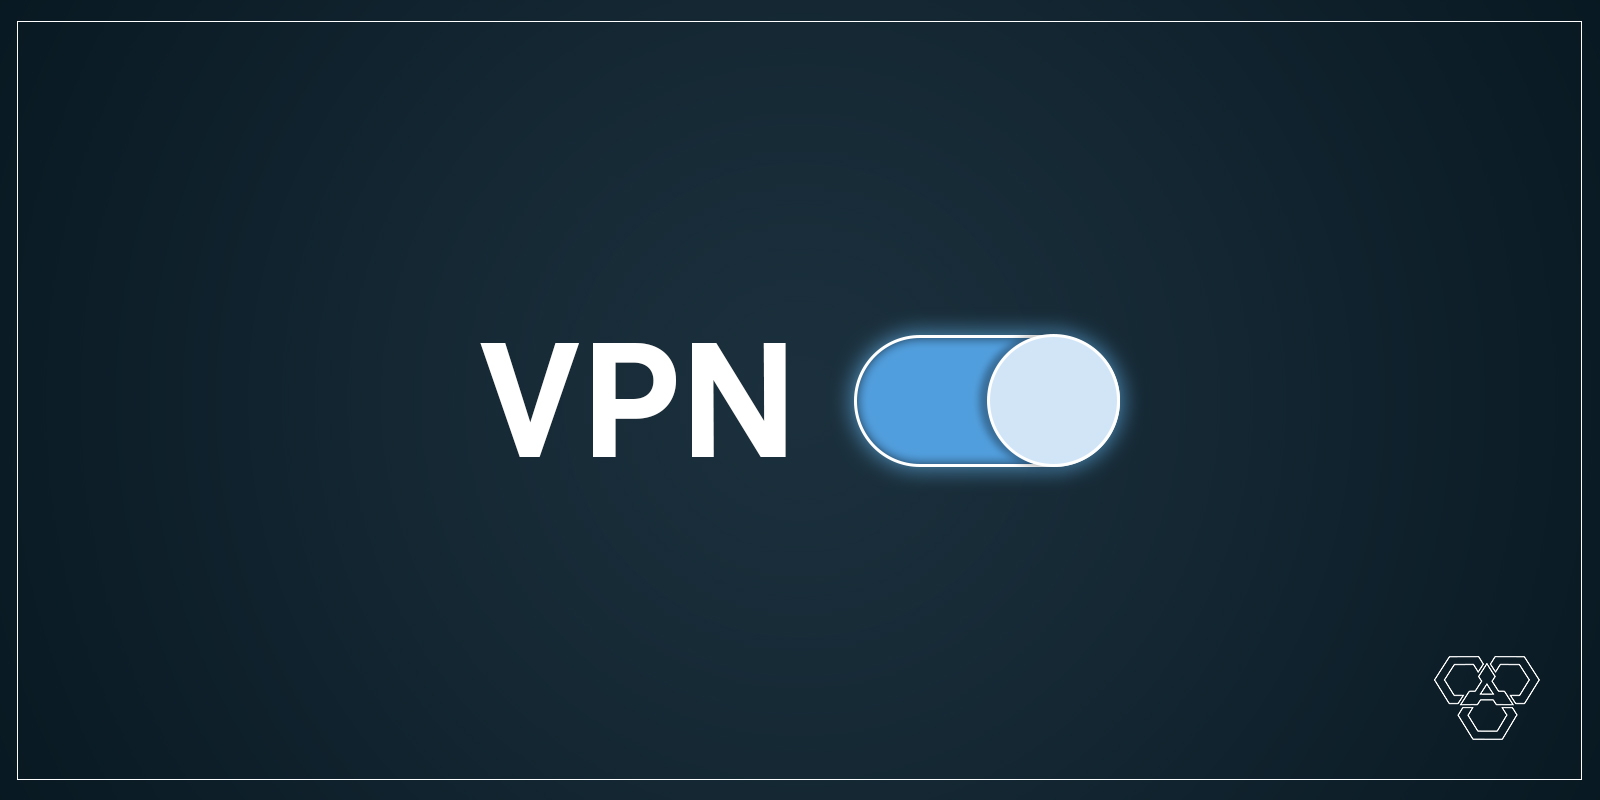 What Is A Vpn, And How Does It Work?